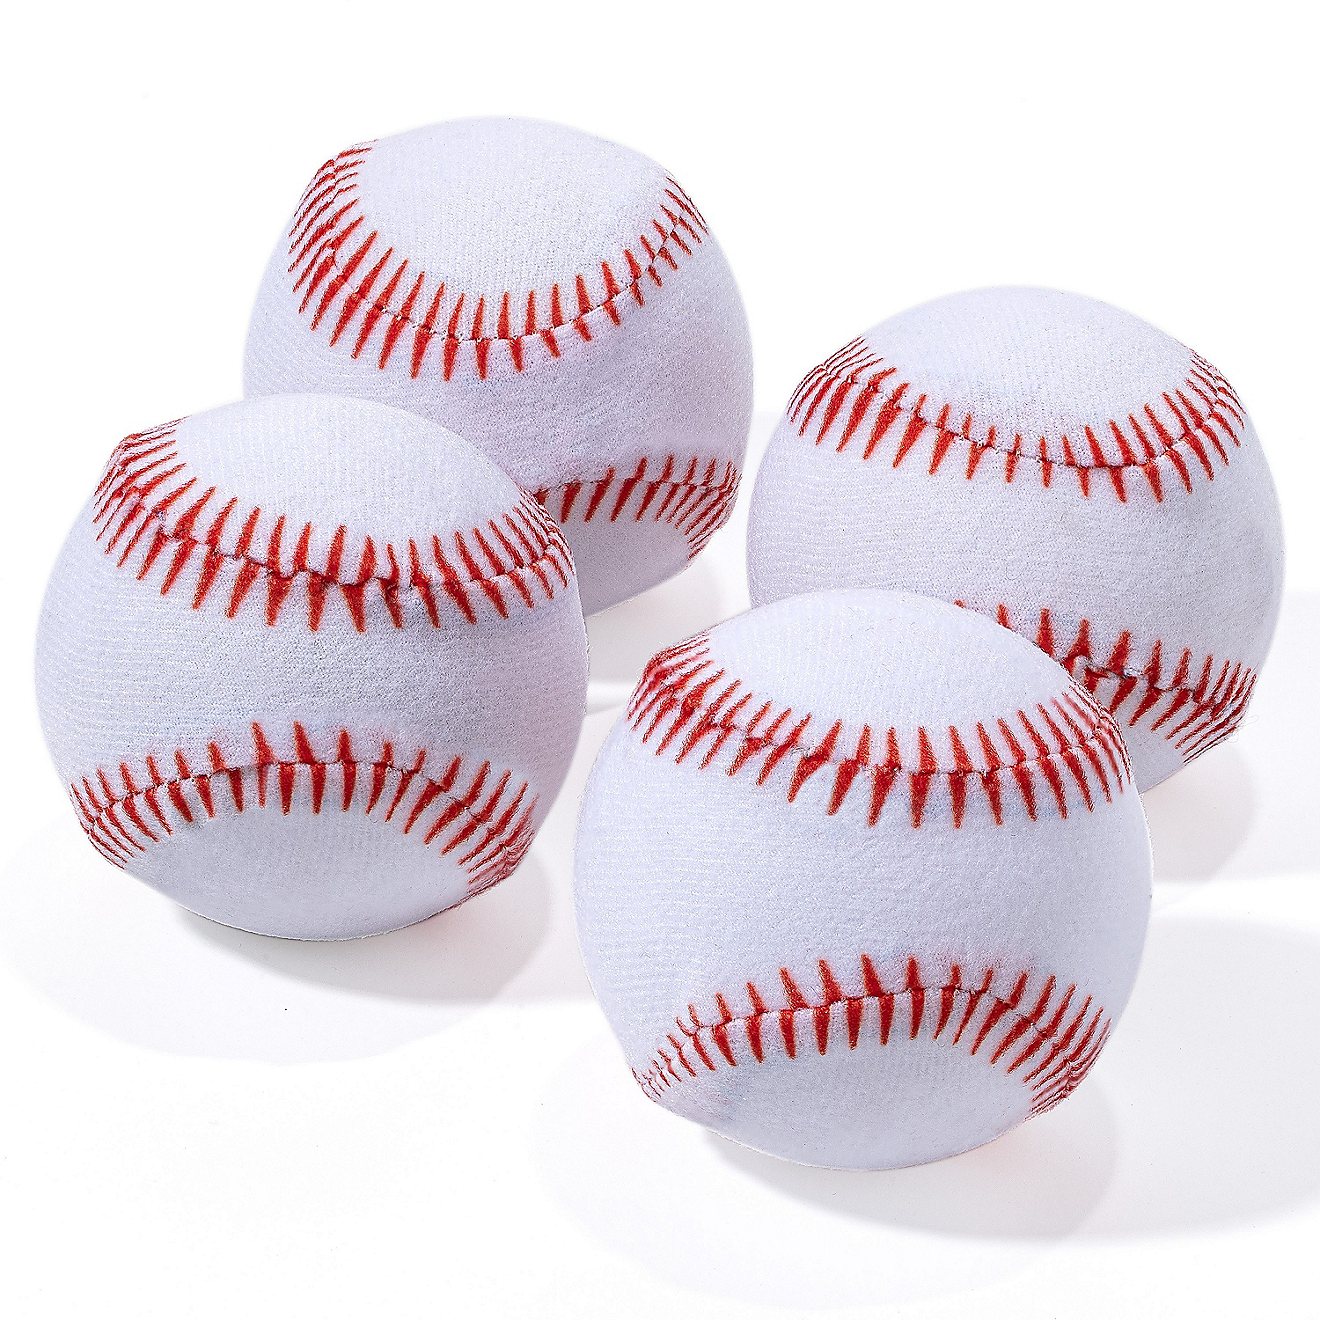 Franklin Kids' Self Stick Replacement Baseballs 4-Pack                                                                           - view number 1